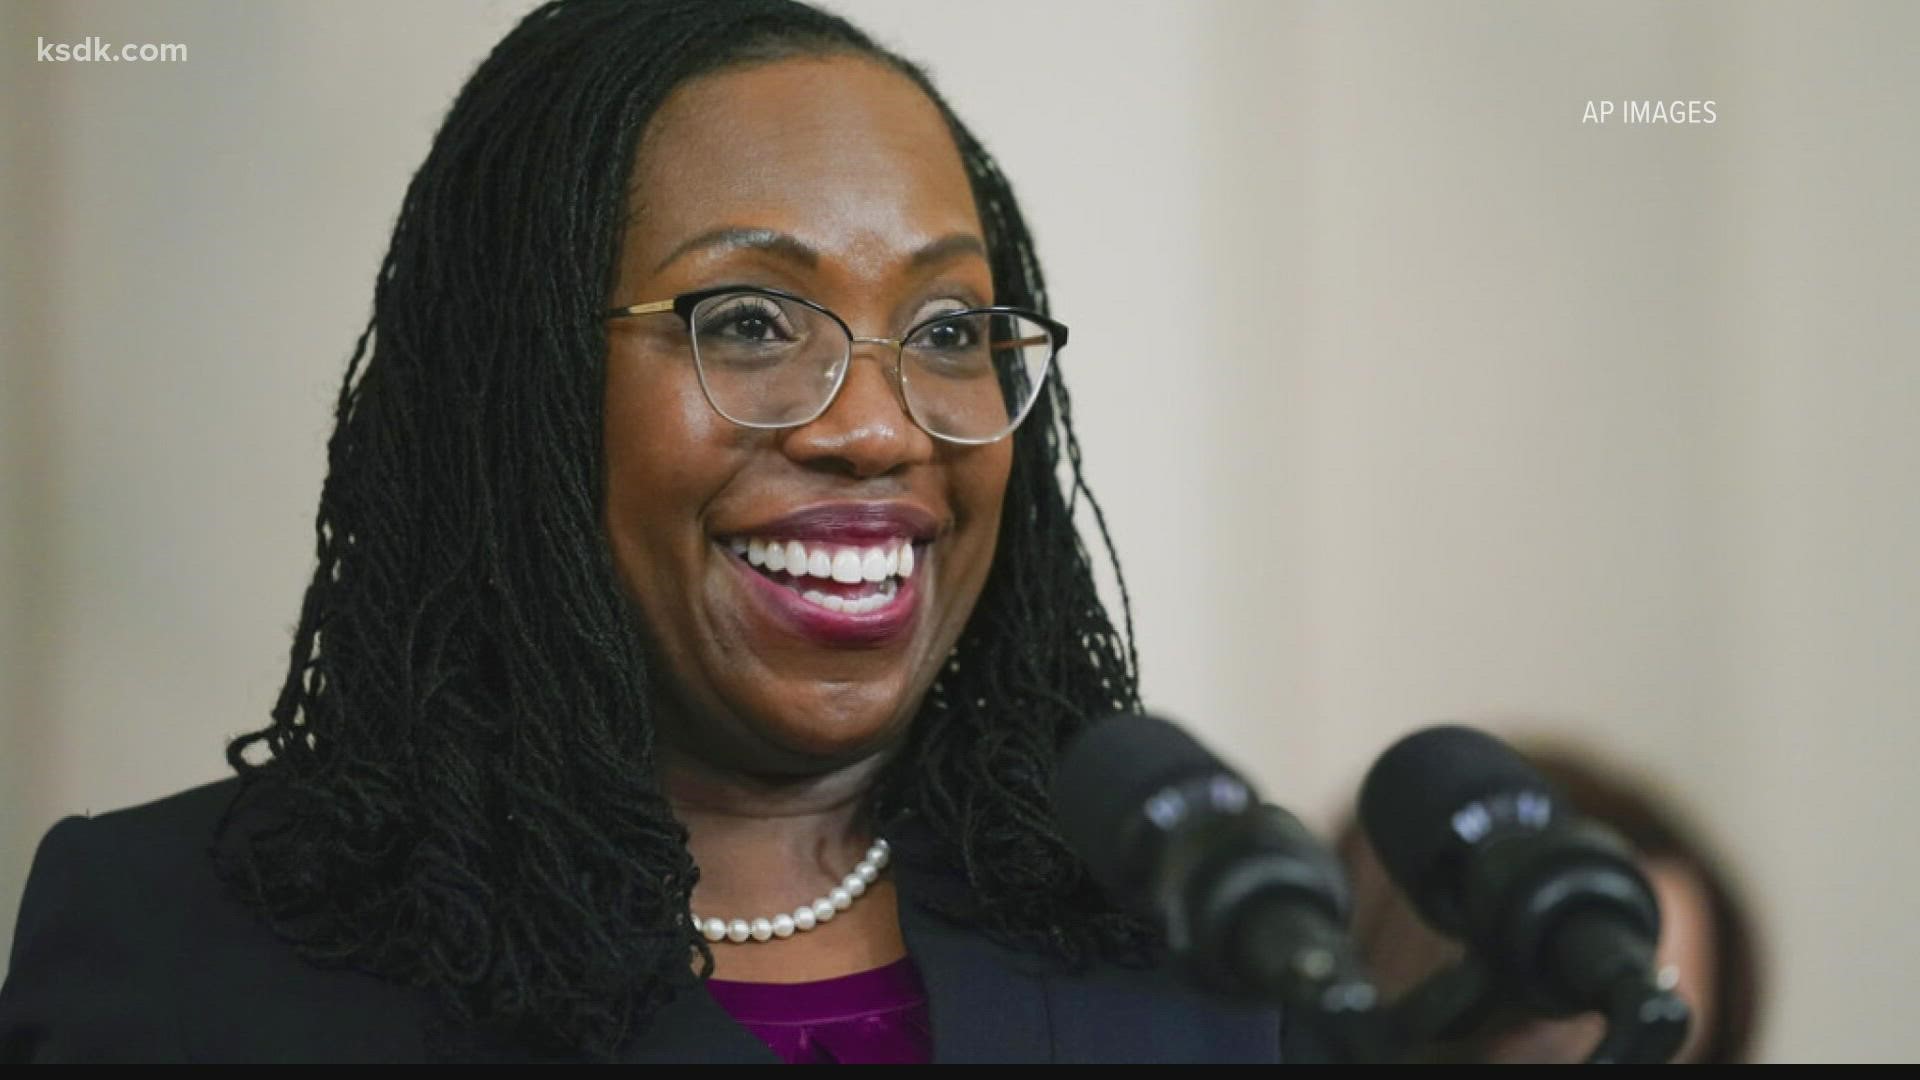 President Biden has selected Ketanji Brown Jackson as his pick for the U.S. Supreme Court. She currently sits on Washington D.C.'s federal appellate court.